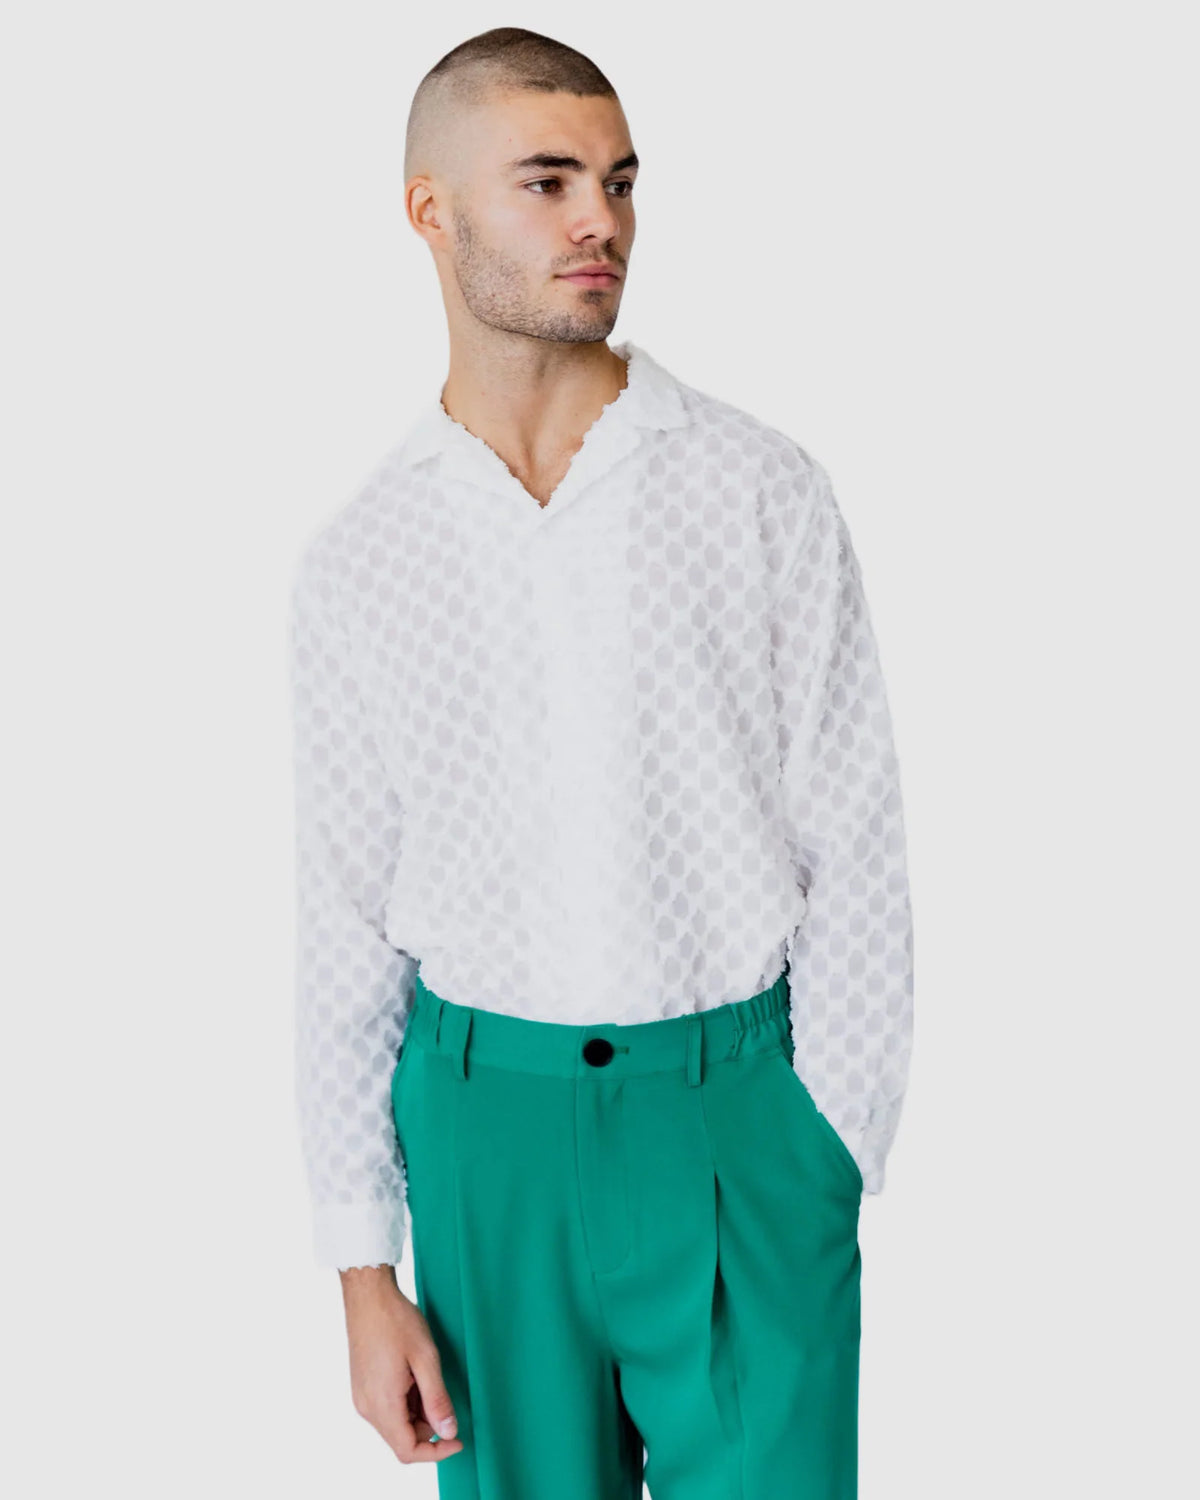 Justin Cassin Gabriel Sheer Patterned Shirt in White Color